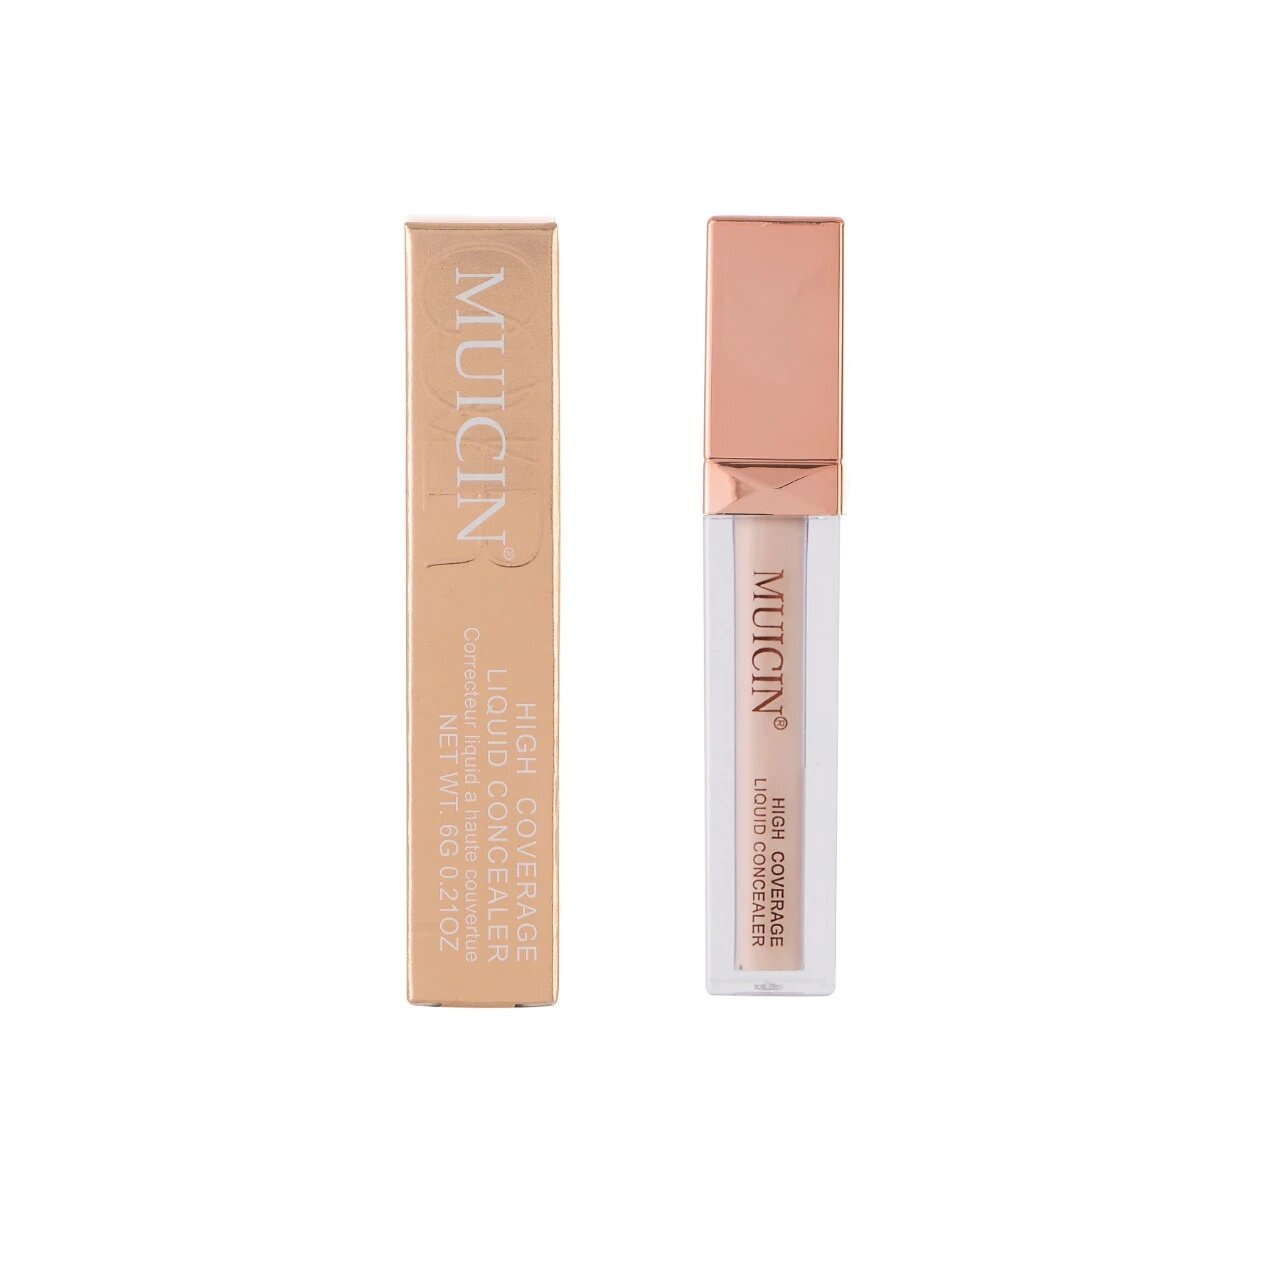 GOLDEN RADIANCE HD COVERAGE LIQUID CONCEALER - LUXURIOUS COVERAGE